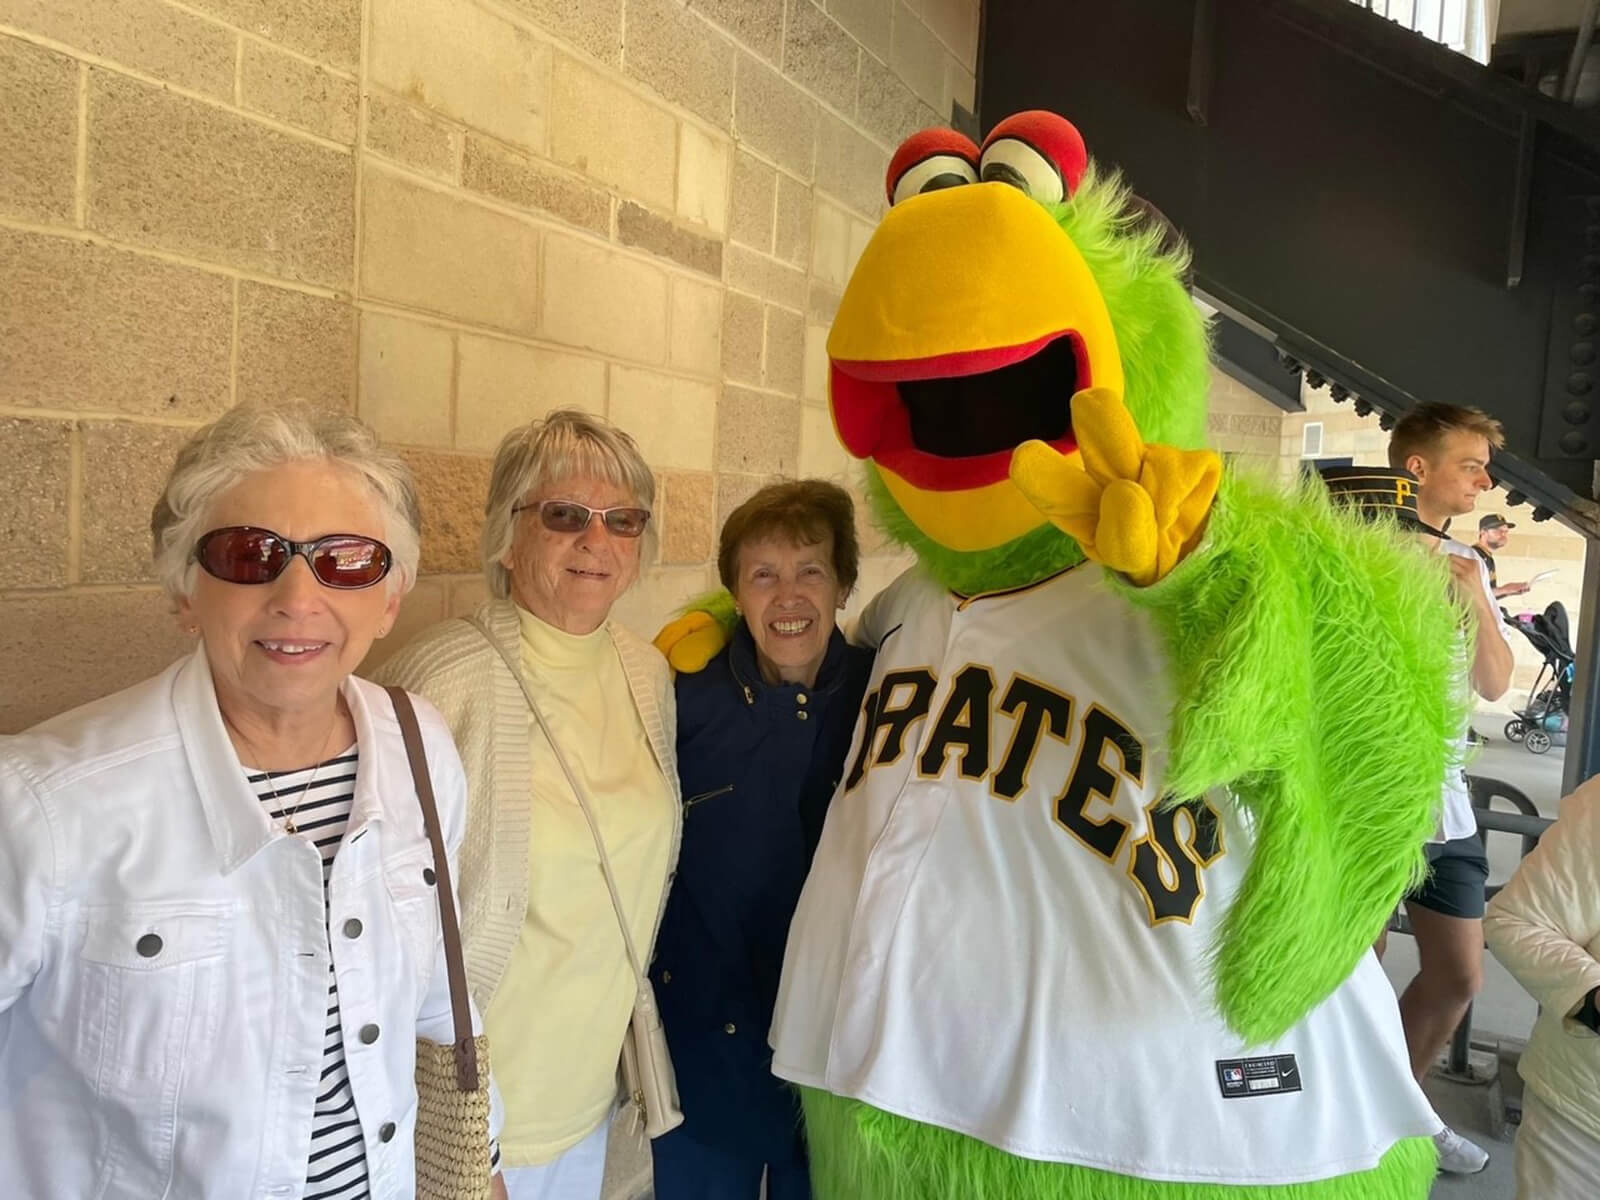 Senior residents of McMurray enjoying an outdoor baseball event with mascot.